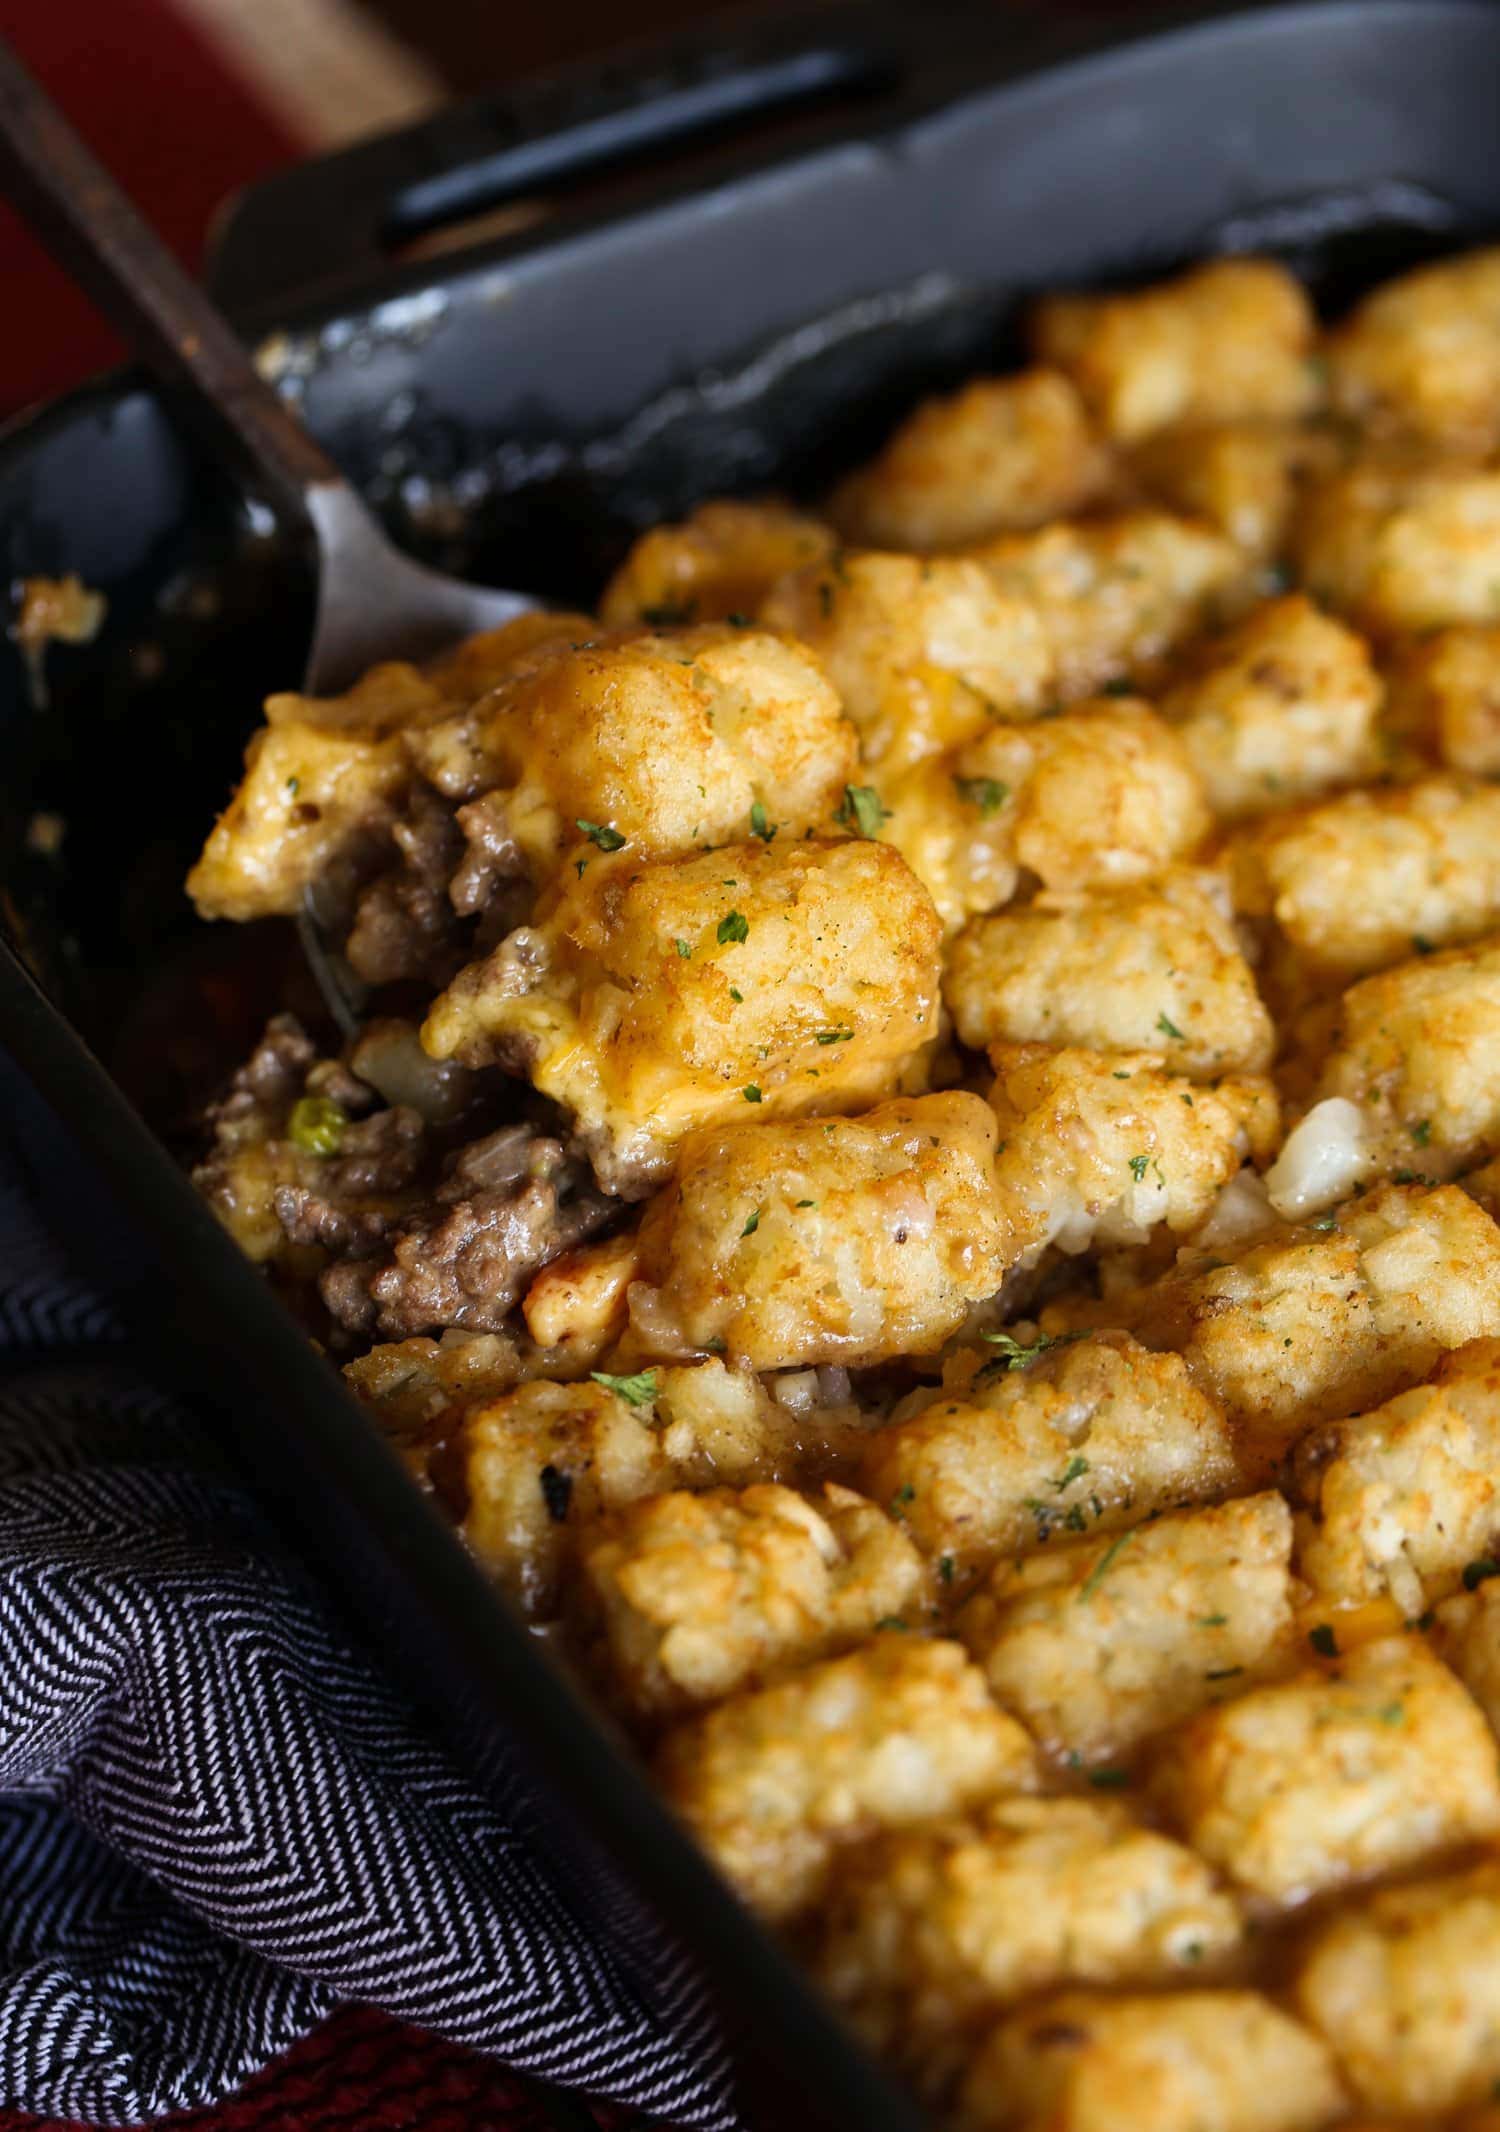 Spoonful of cheesy tater tot casserole.